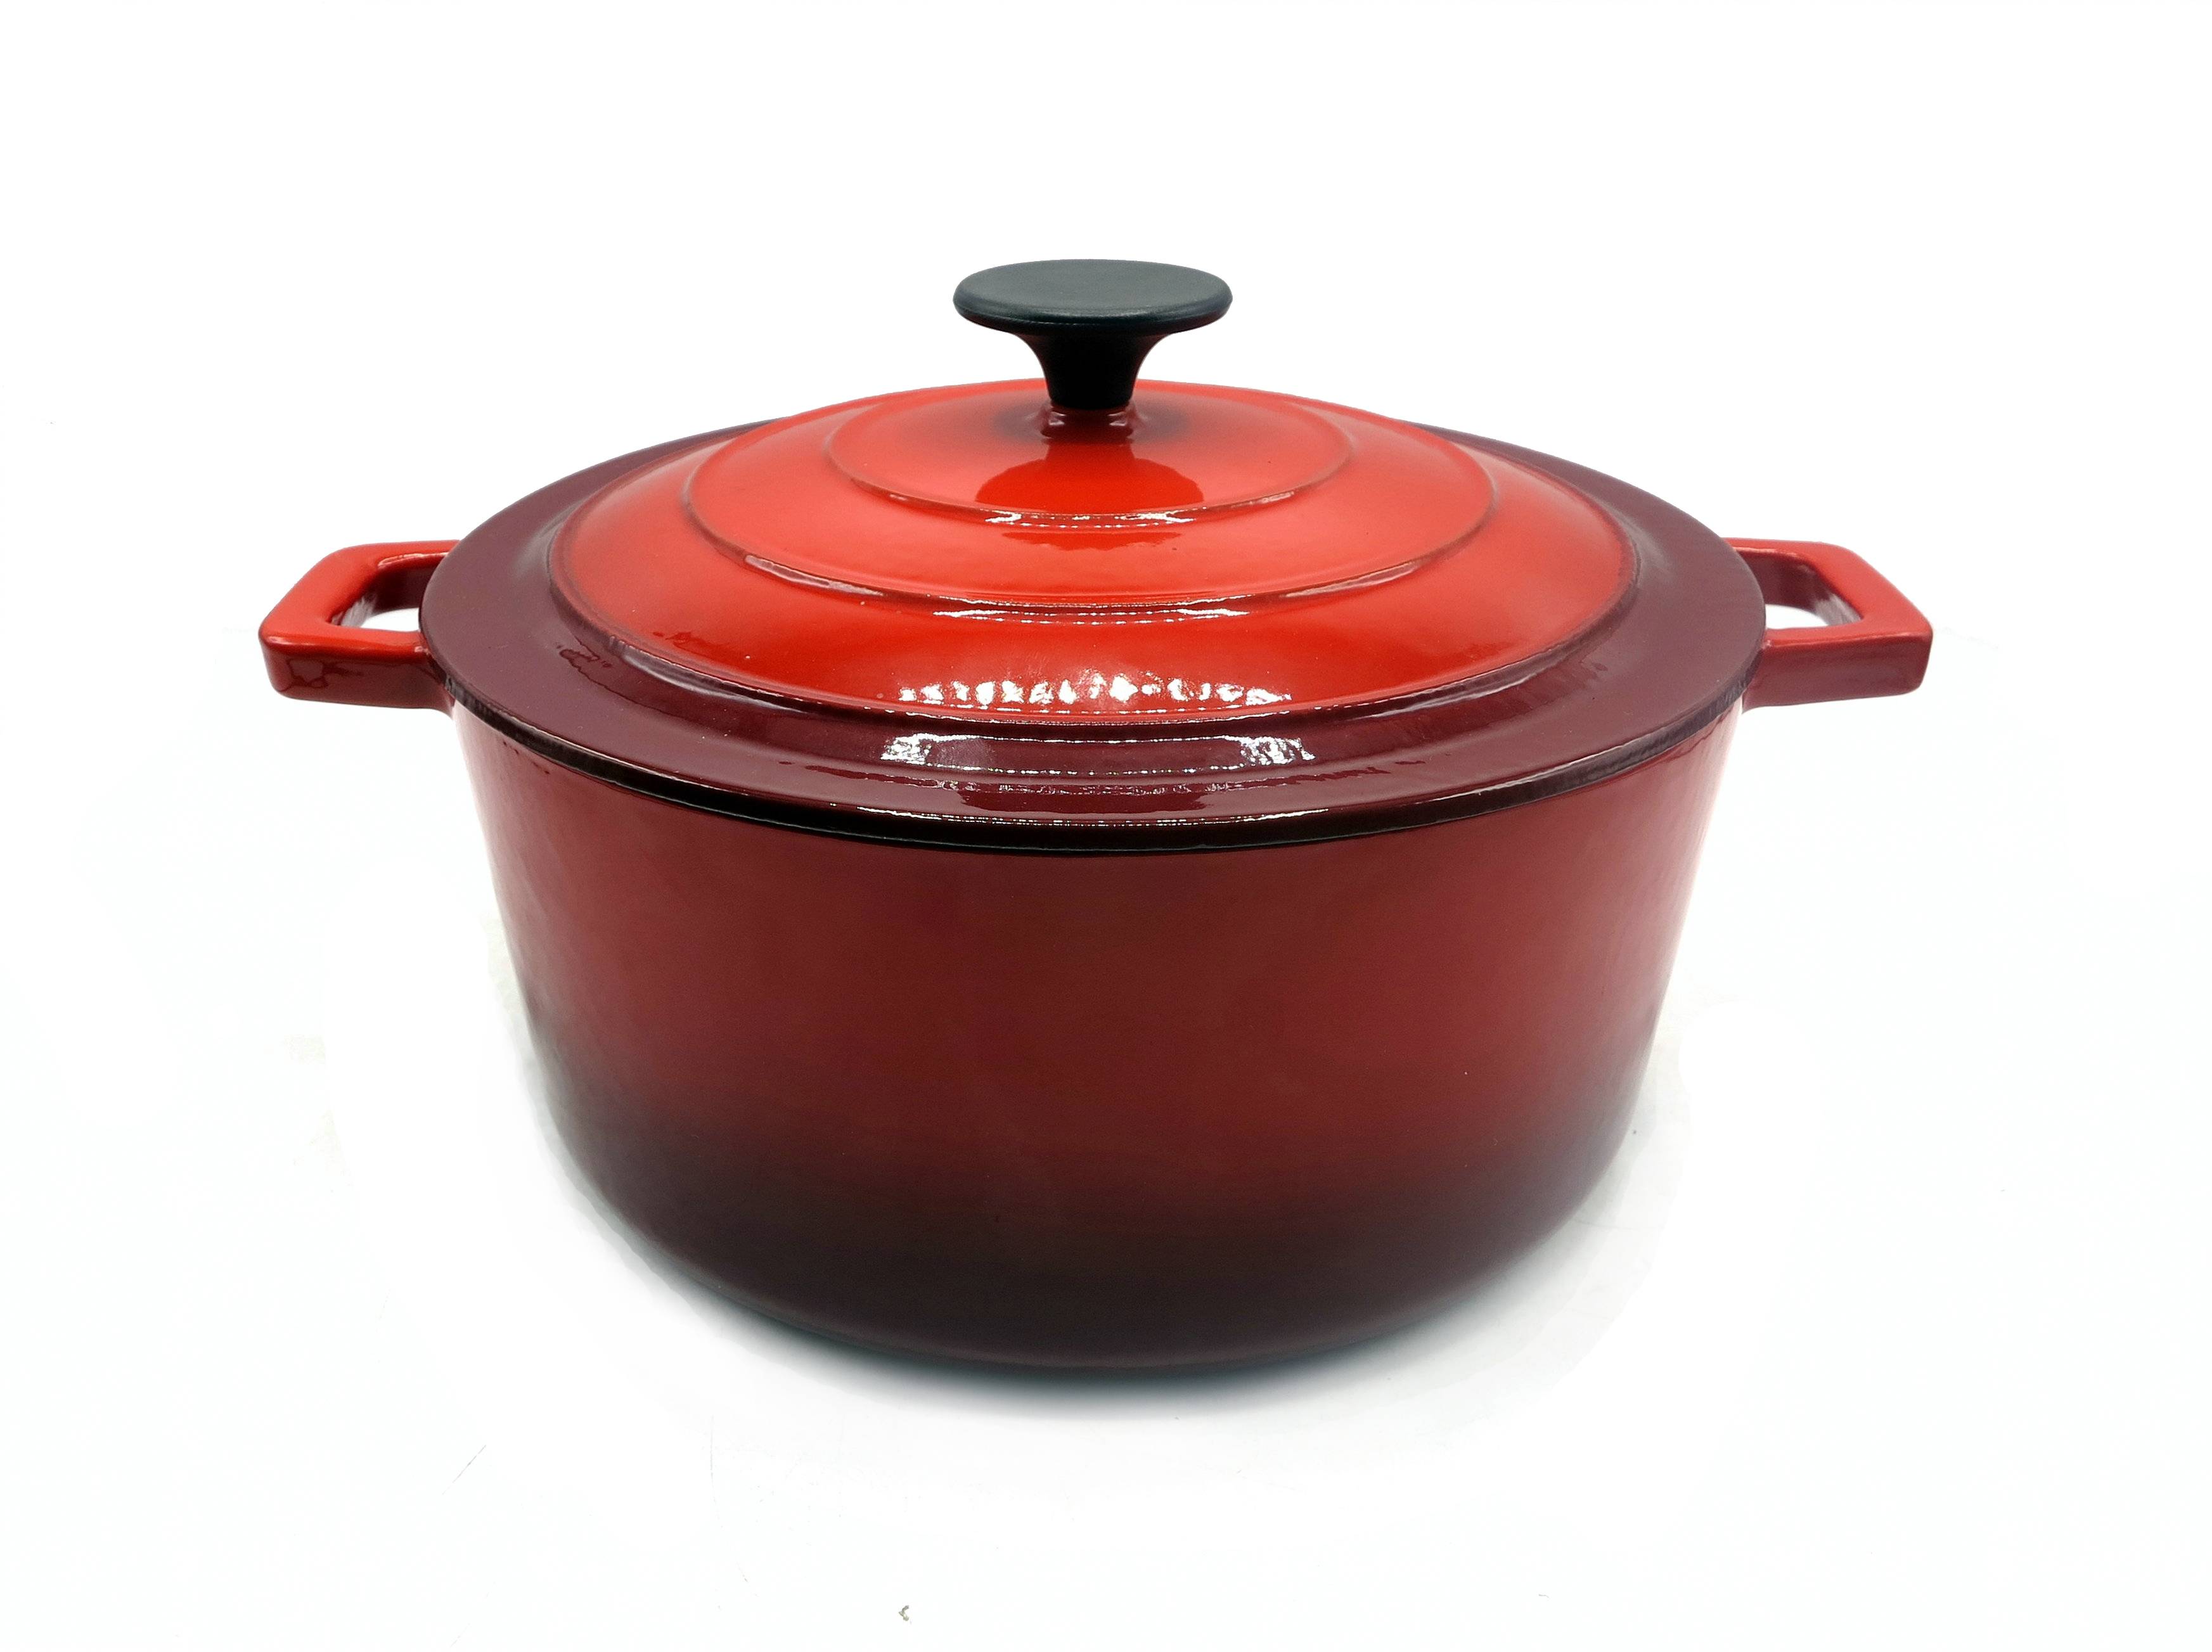 Amazon Hot sale  enamel cookware set insulated food warmer cast iron casserole for kitchen cooking delicious food dia 25.5CM